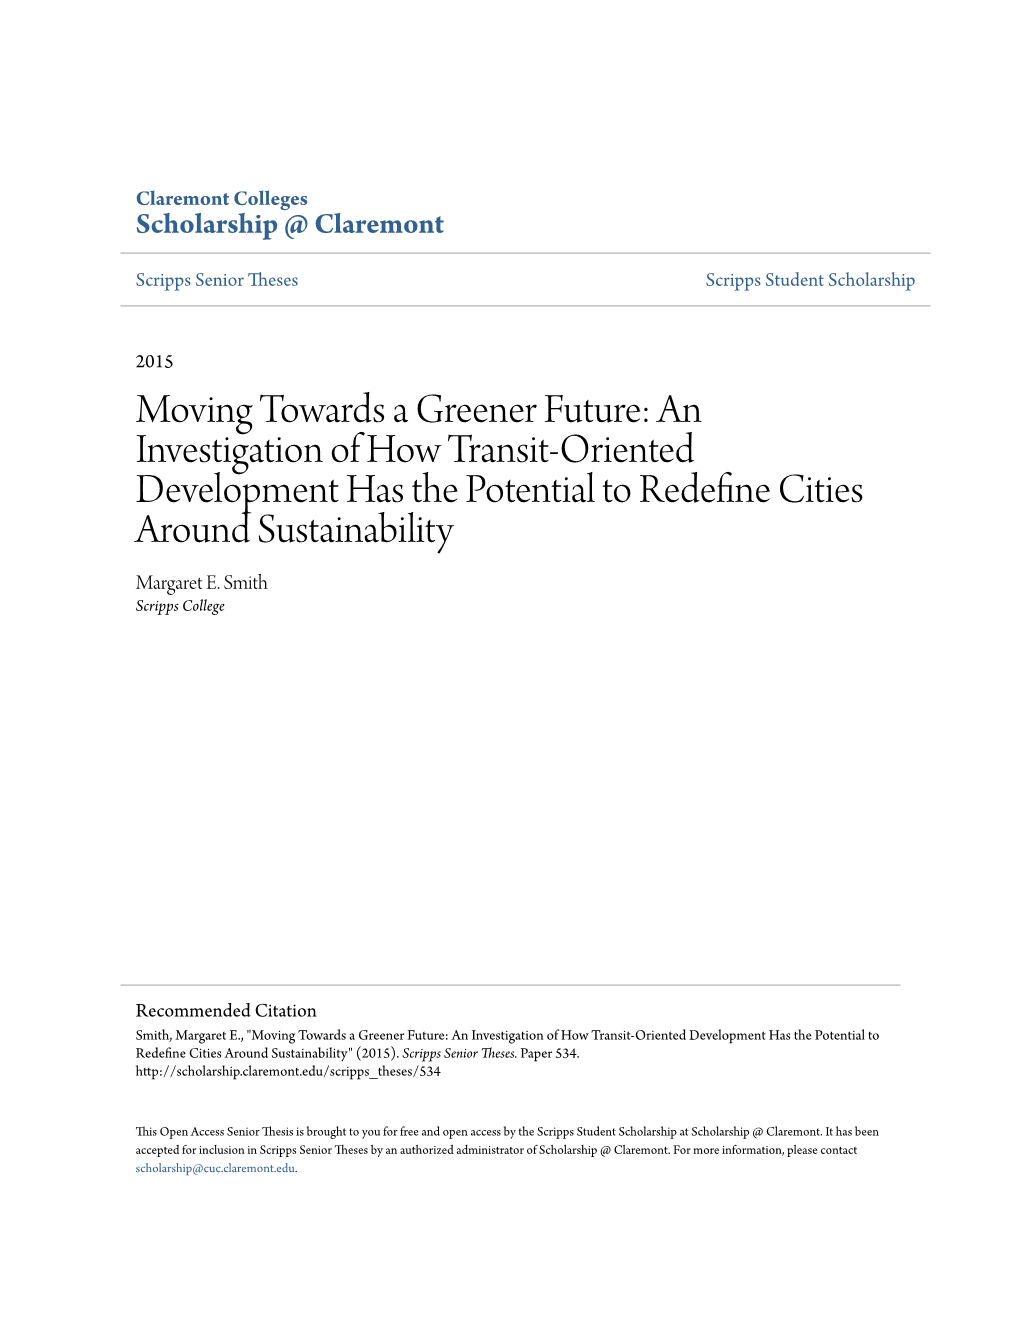 An Investigation of How Transit-Oriented Development Has the Potential to Redefine Cities Around Sustainability